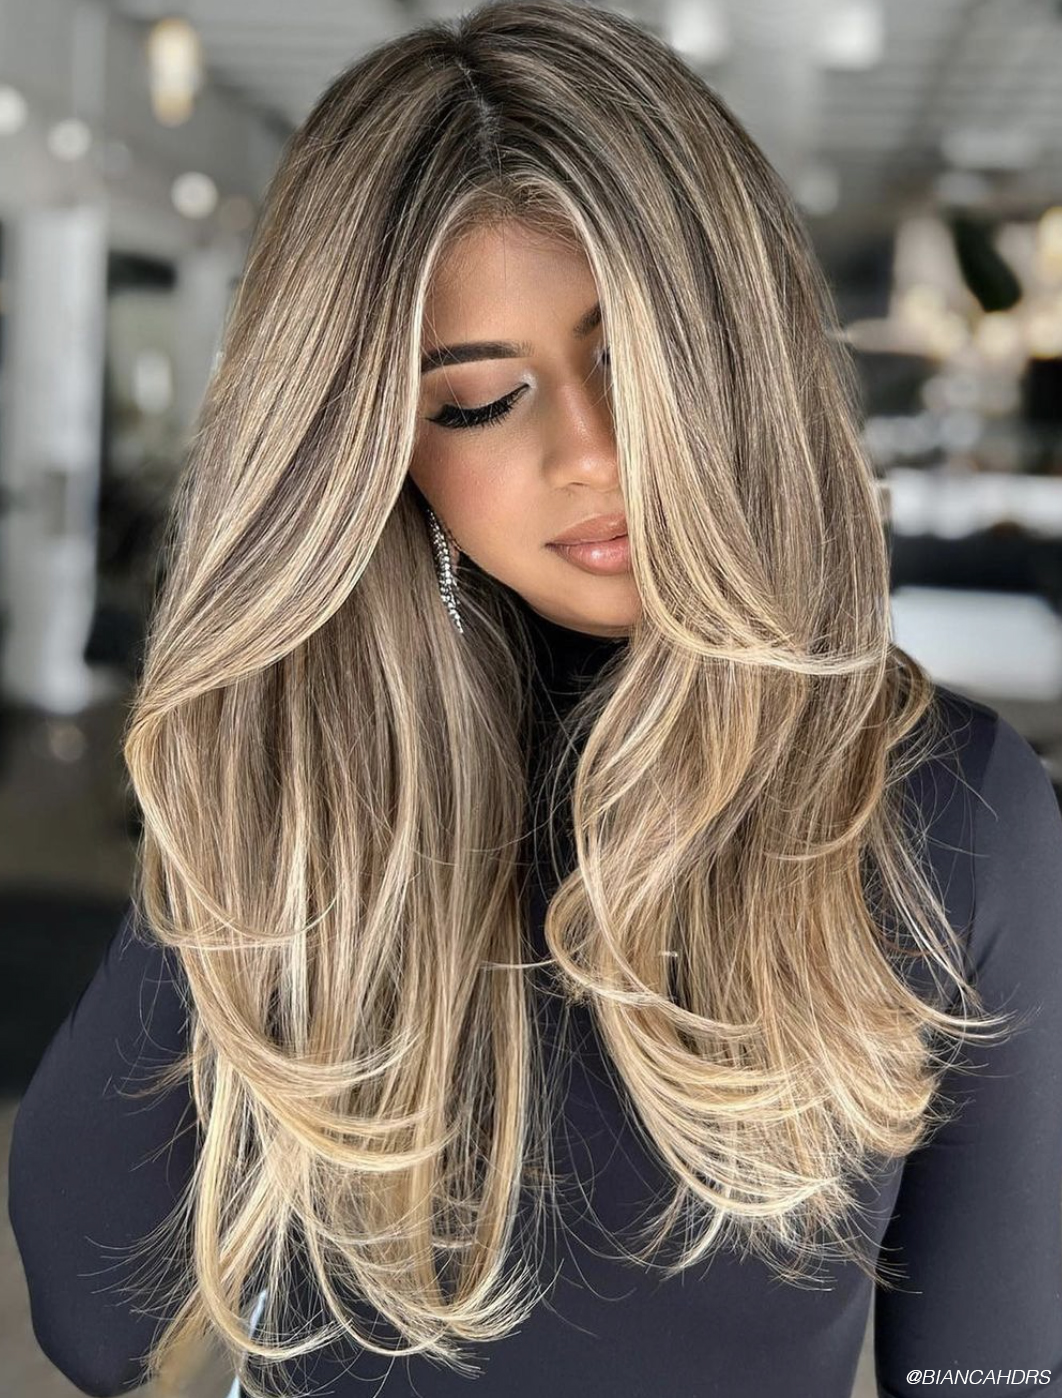 Blonding Season is Back — This Is How To Achieve The Top Shades for Summer  - Bangstyle - House of Hair Inspiration